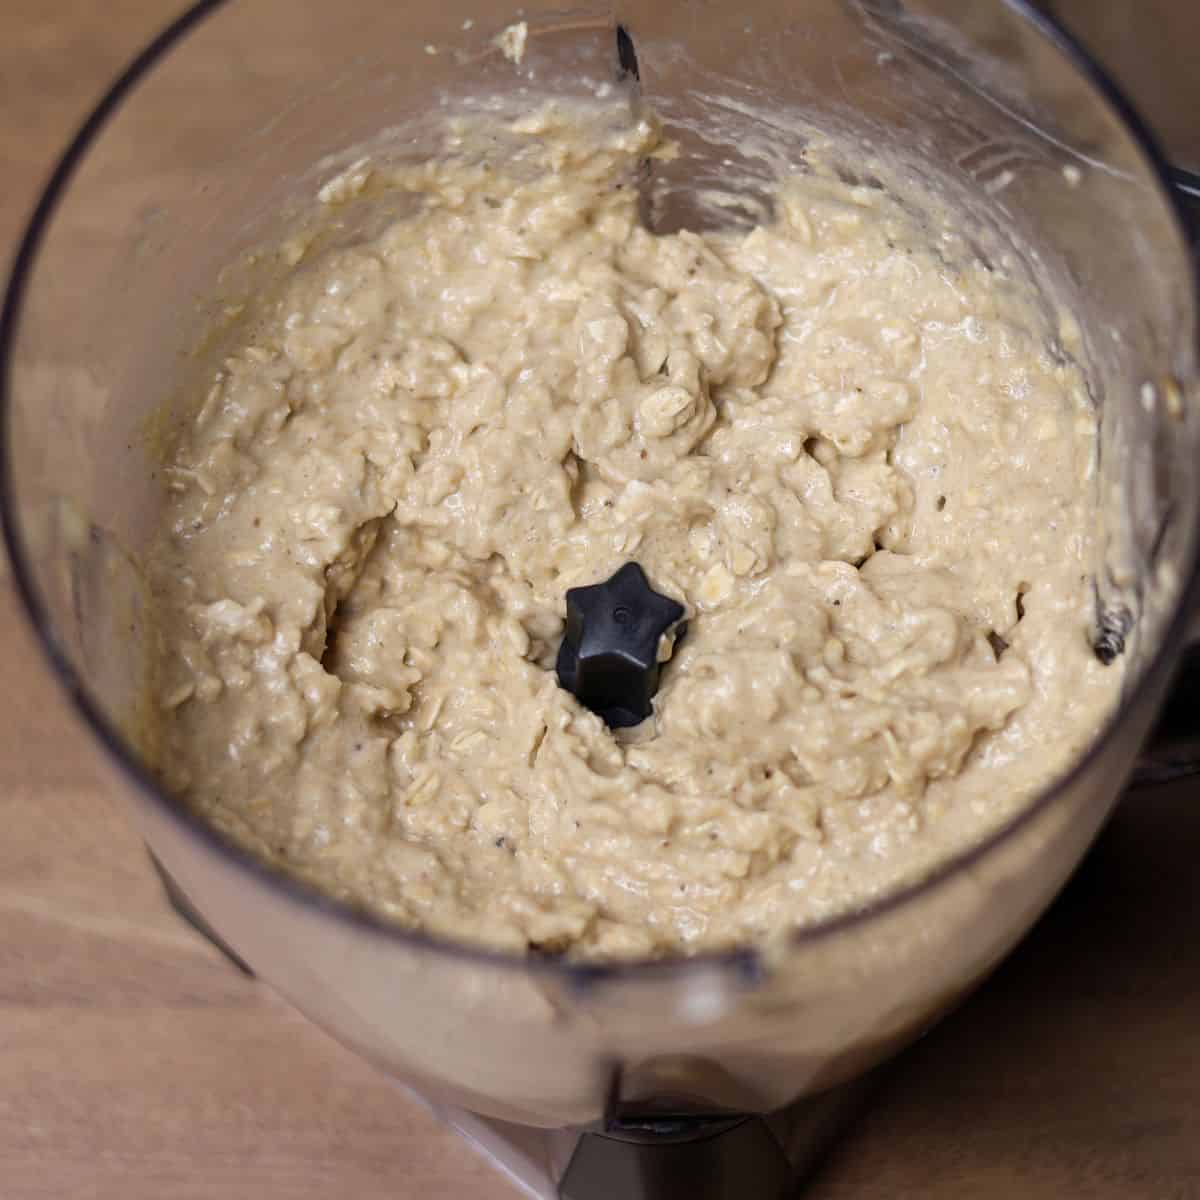 Blender filled with the mix of bananas, sprouted oats, and maple syrup blended in a banana bread batter.